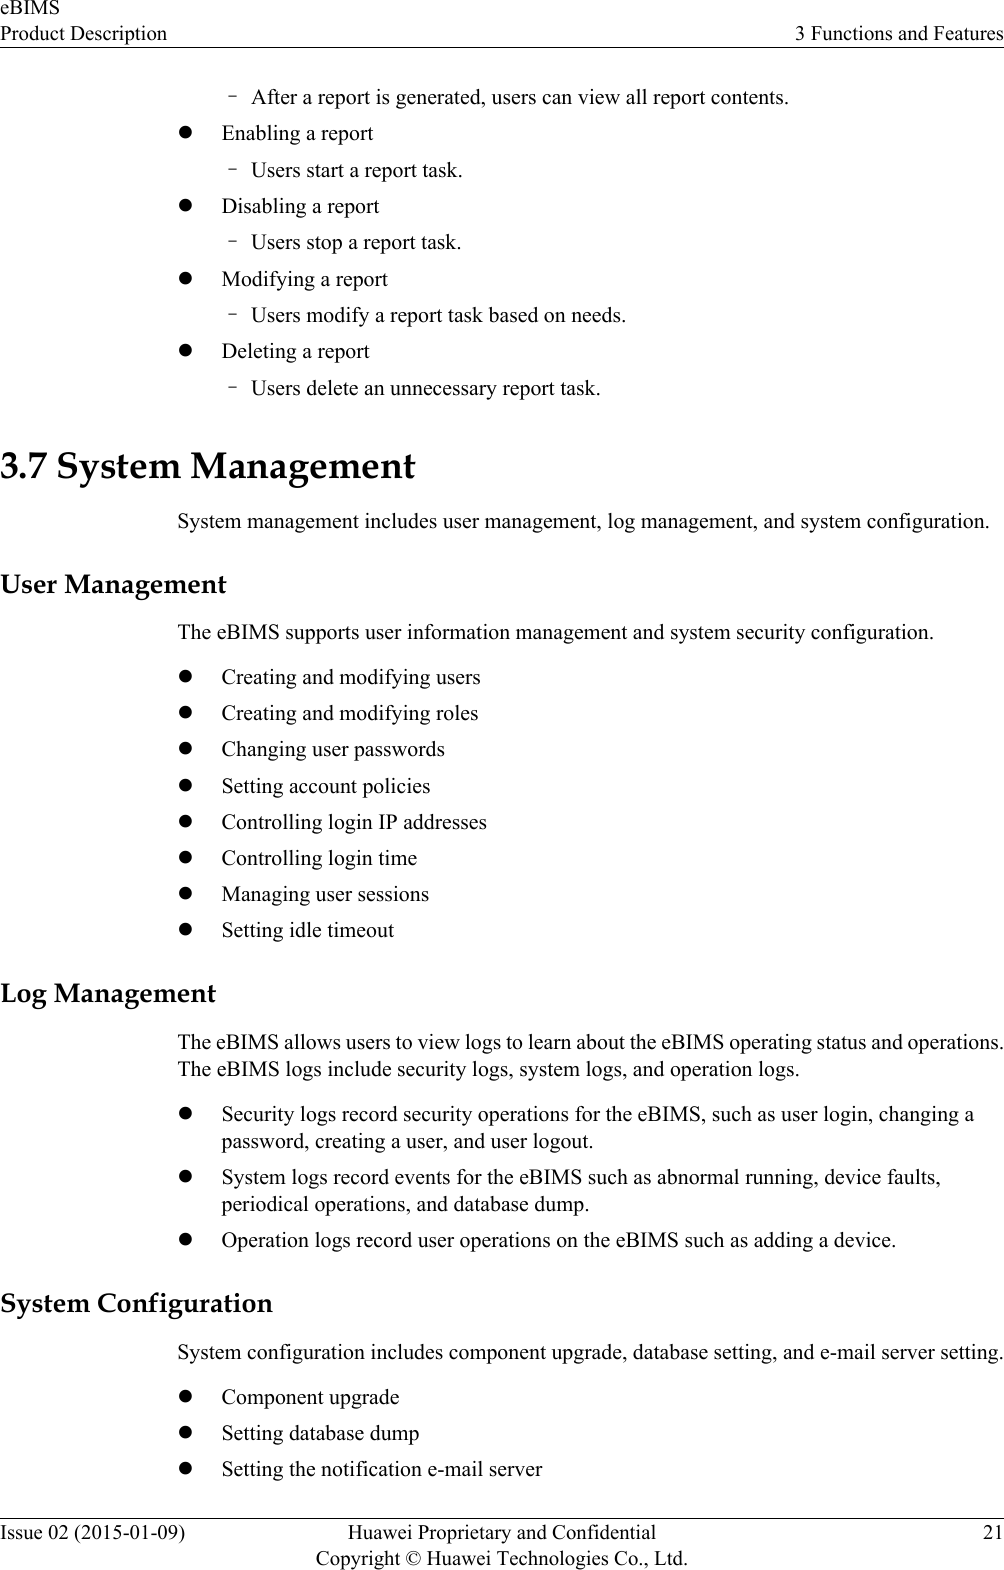 –After a report is generated, users can view all report contents.lEnabling a report–Users start a report task.lDisabling a report–Users stop a report task.lModifying a report–Users modify a report task based on needs.lDeleting a report–Users delete an unnecessary report task.3.7 System ManagementSystem management includes user management, log management, and system configuration.User ManagementThe eBIMS supports user information management and system security configuration.lCreating and modifying userslCreating and modifying roleslChanging user passwordslSetting account policieslControlling login IP addresseslControlling login timelManaging user sessionslSetting idle timeoutLog ManagementThe eBIMS allows users to view logs to learn about the eBIMS operating status and operations.The eBIMS logs include security logs, system logs, and operation logs.lSecurity logs record security operations for the eBIMS, such as user login, changing apassword, creating a user, and user logout.lSystem logs record events for the eBIMS such as abnormal running, device faults,periodical operations, and database dump.lOperation logs record user operations on the eBIMS such as adding a device.System ConfigurationSystem configuration includes component upgrade, database setting, and e-mail server setting.lComponent upgradelSetting database dumplSetting the notification e-mail servereBIMSProduct Description 3 Functions and FeaturesIssue 02 (2015-01-09) Huawei Proprietary and ConfidentialCopyright © Huawei Technologies Co., Ltd.21